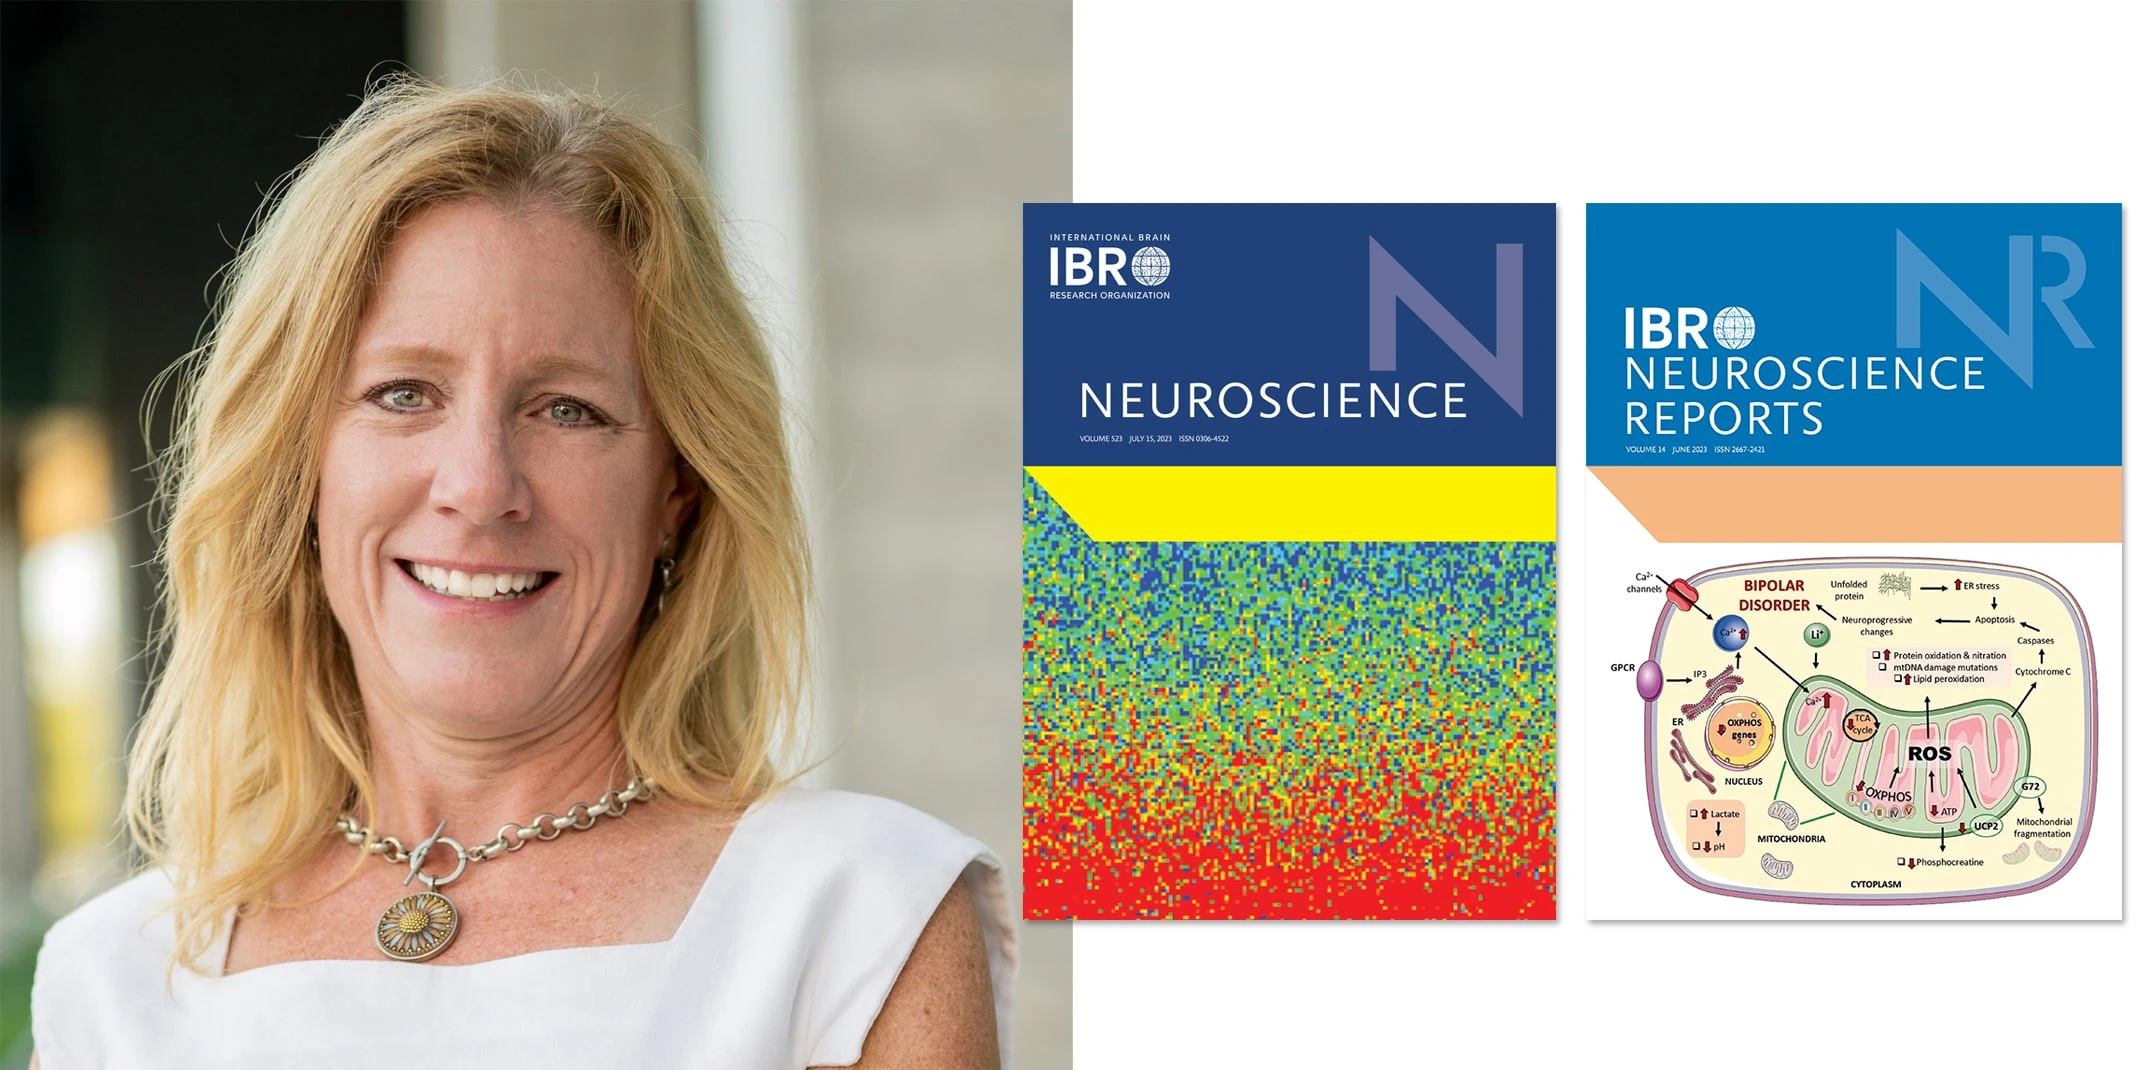 Dr Tracey Bale, IBRO President and Professor in the Department of Psychiatry at the University of Colorado, with the covers of Neuroscience and IBRO Neuroscience Reports